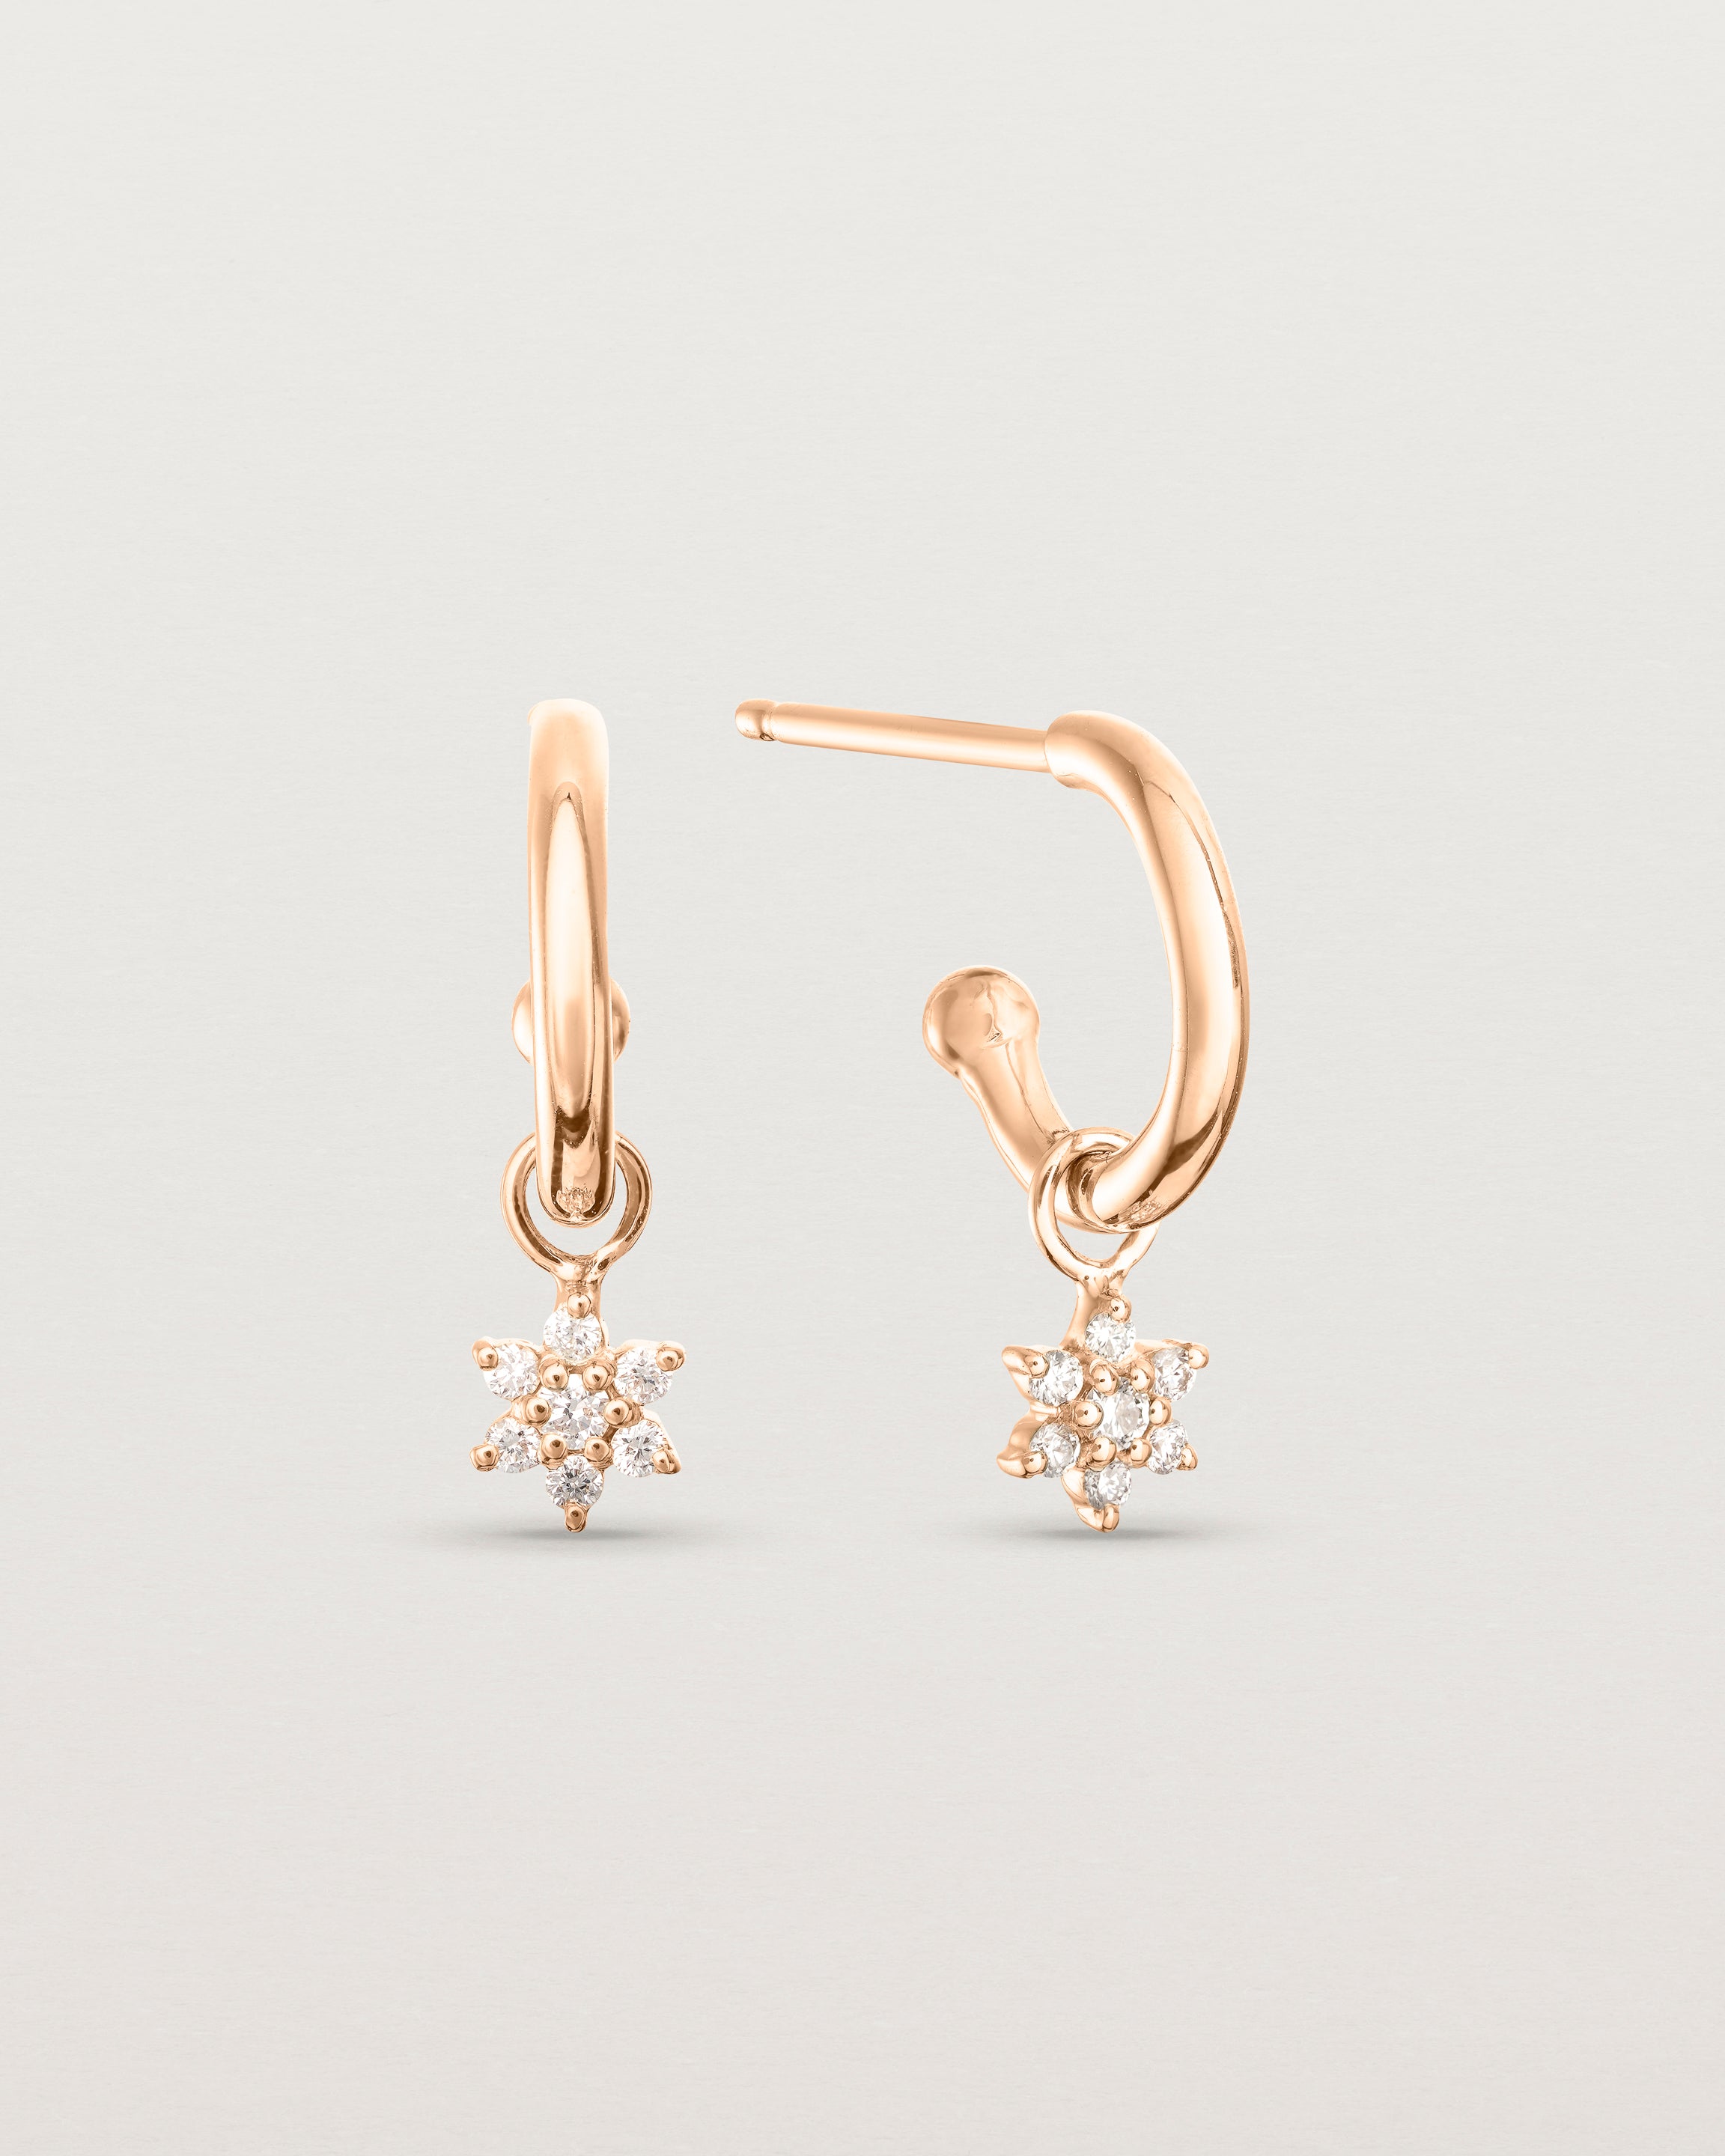 Close up image of the two petit starburst diamond studs in rose gold